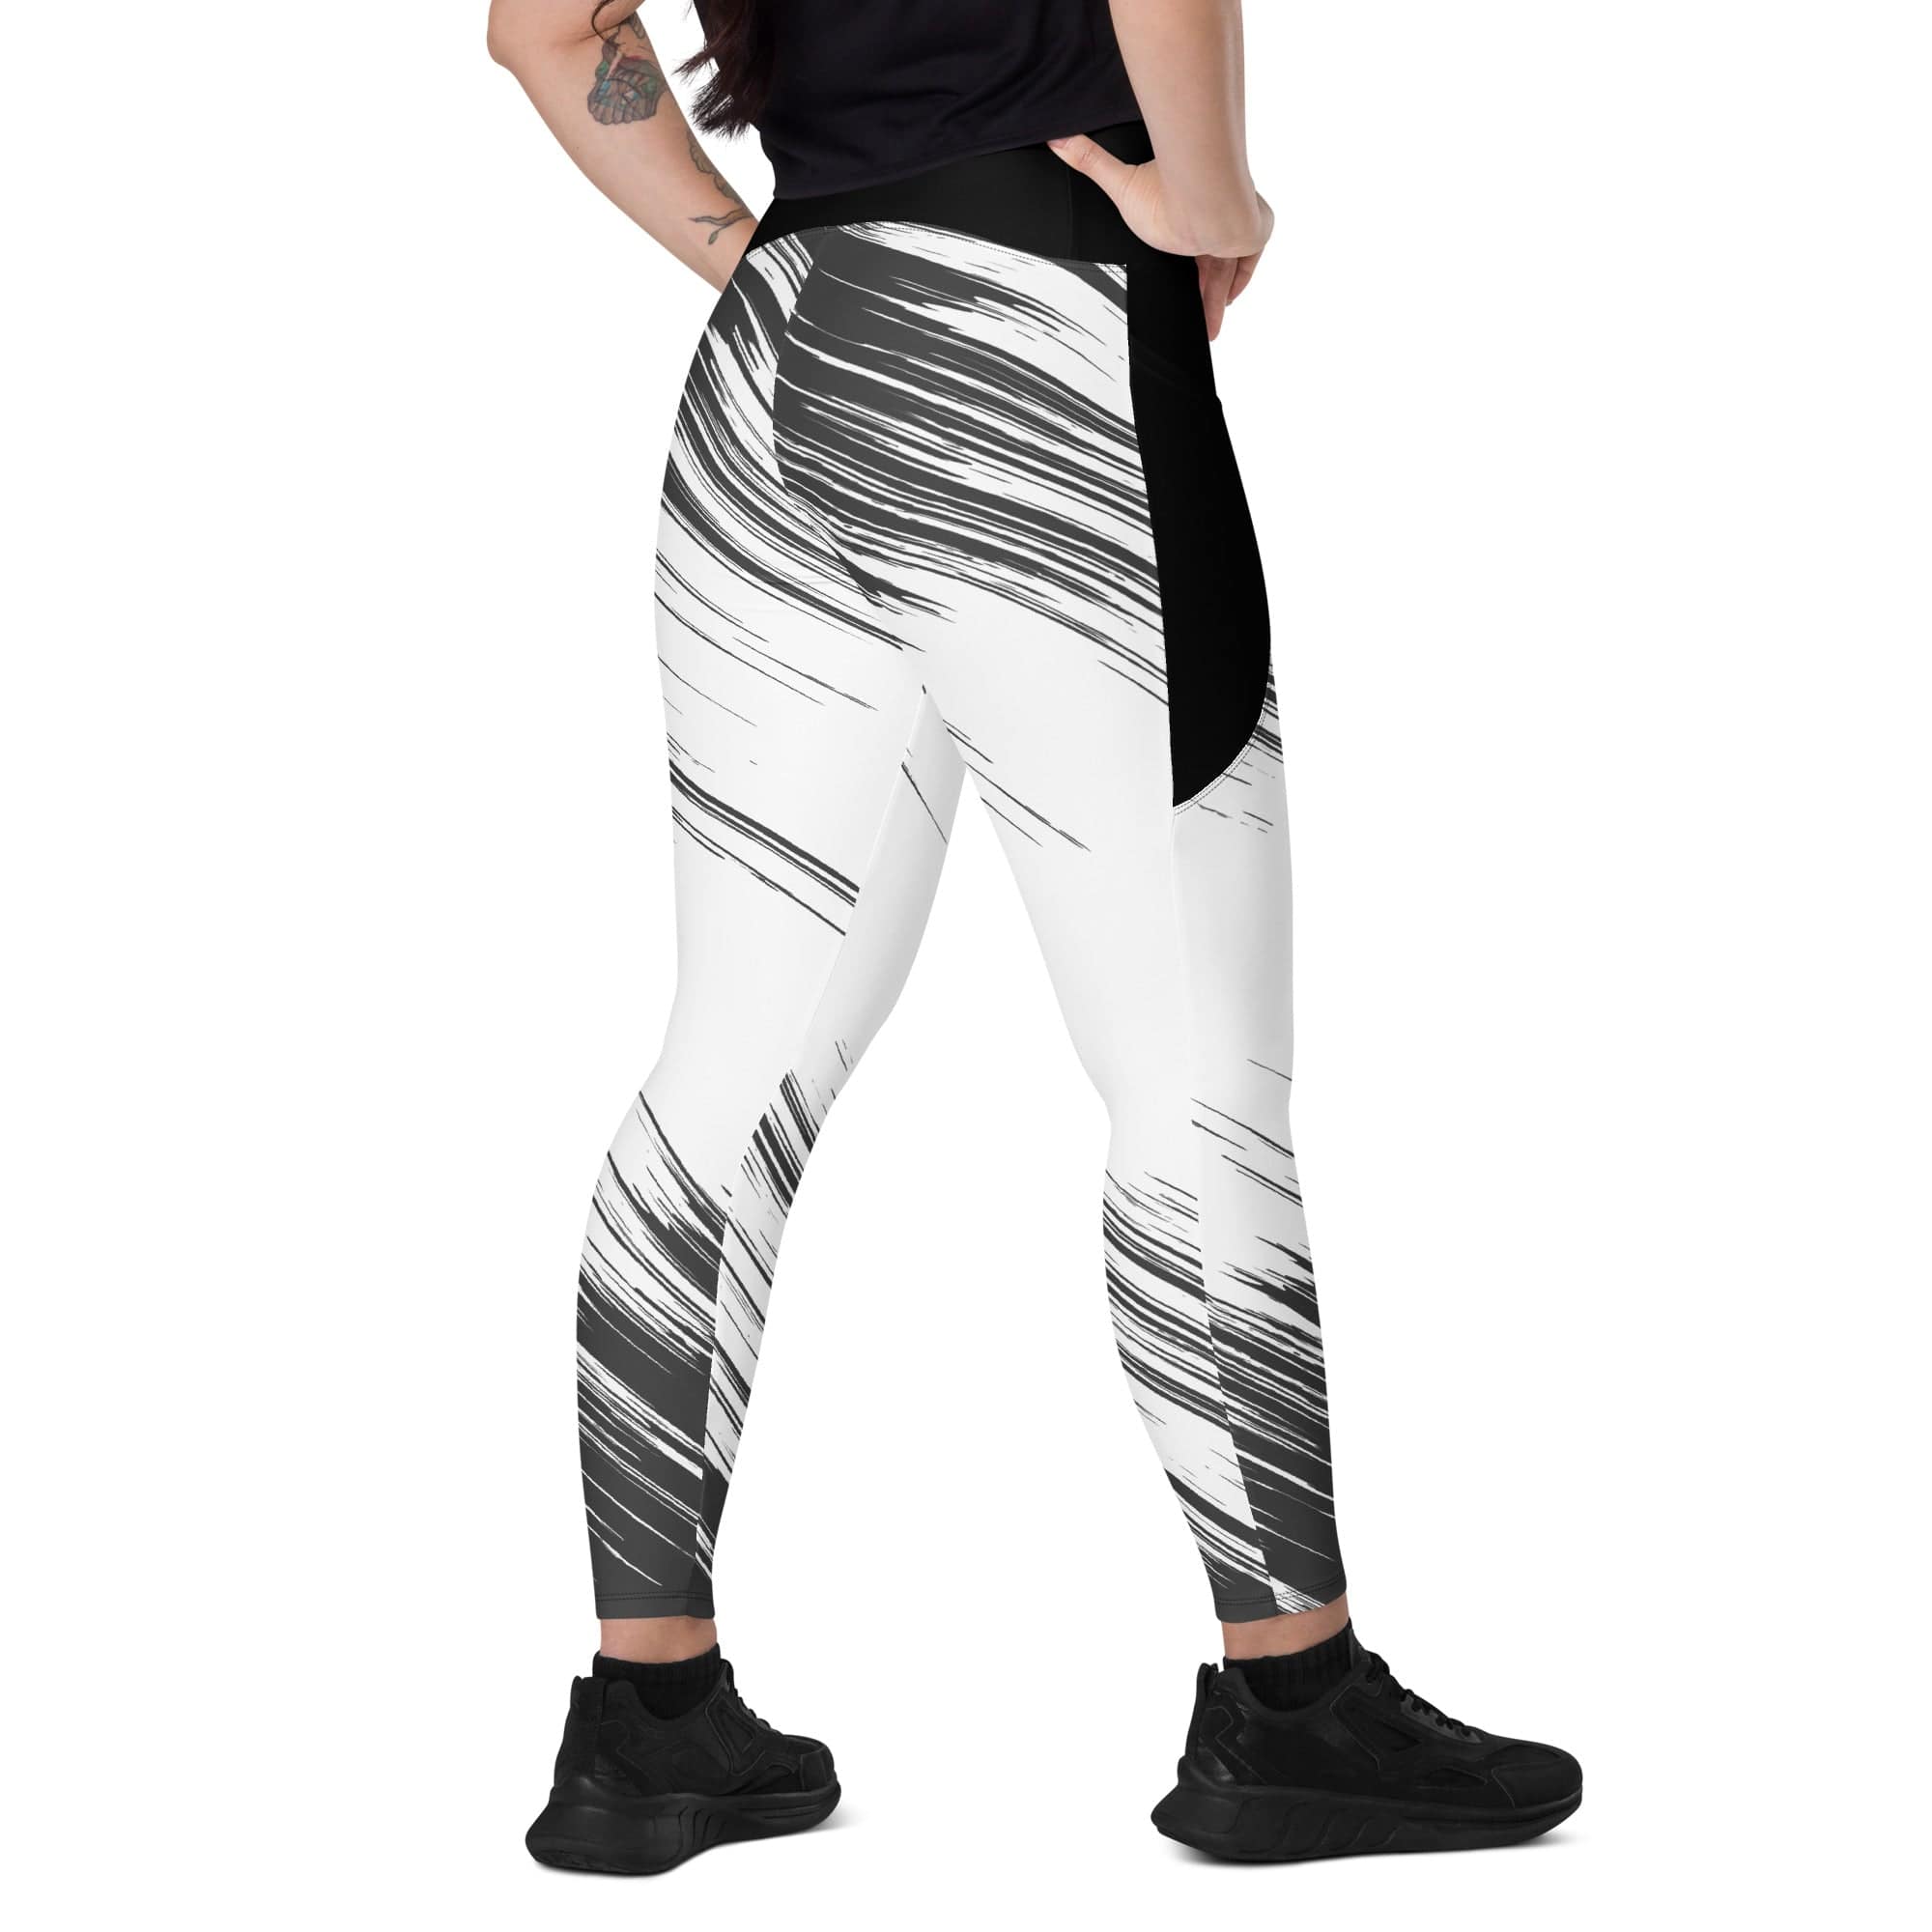 Fire Cornhole Crossover leggings with pockets in black and white